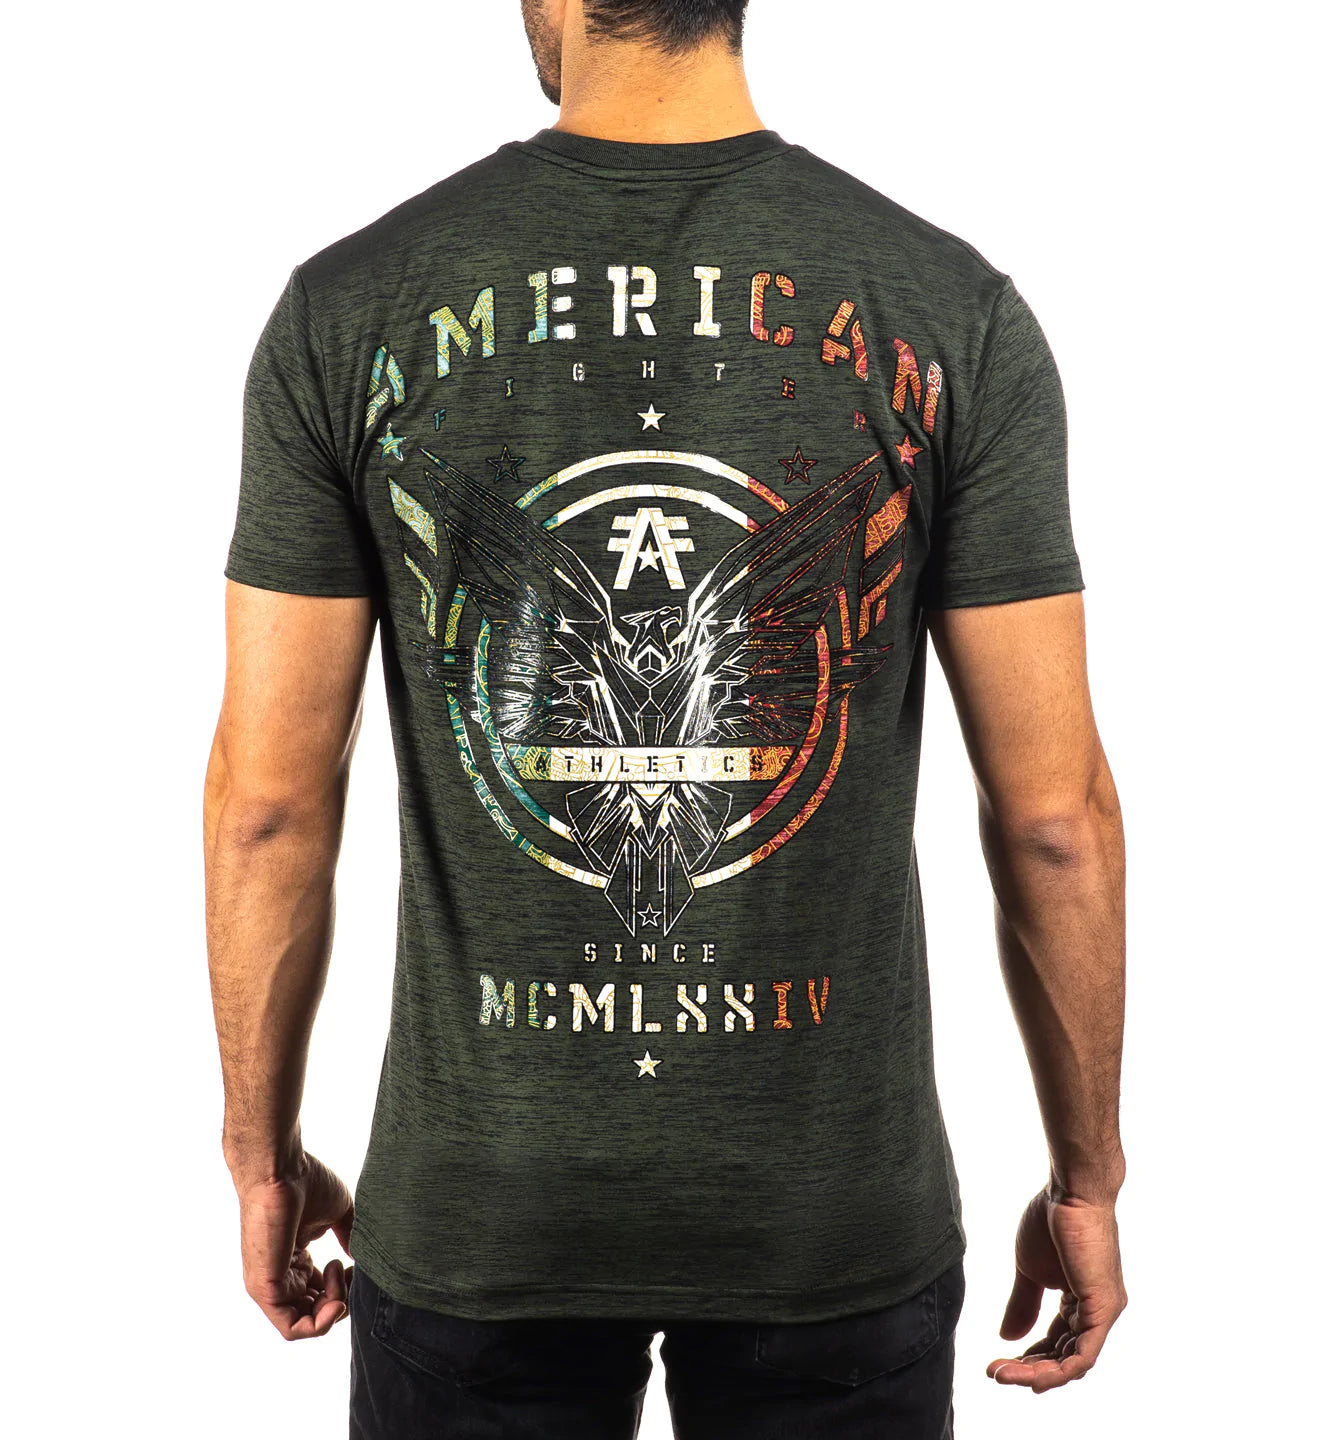 AMERICAN FIGHTER TEE MILITARY GREEN